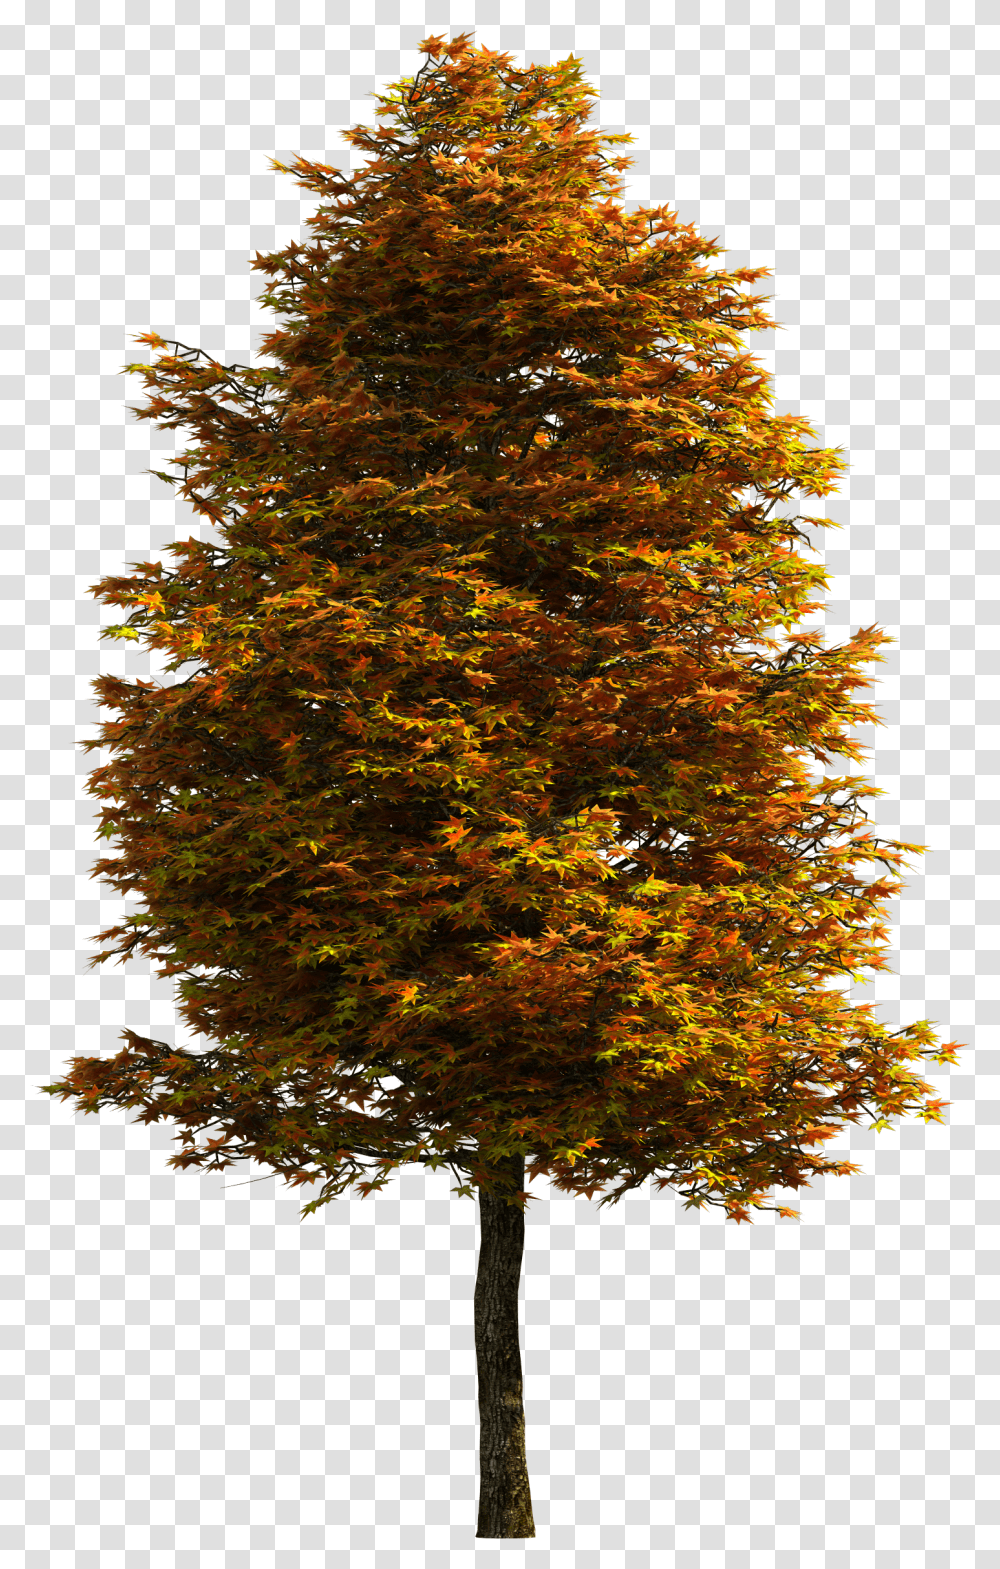 Tree Download Free Clipart Background Trees, Plant, Maple, Fir, Abies Transparent Png